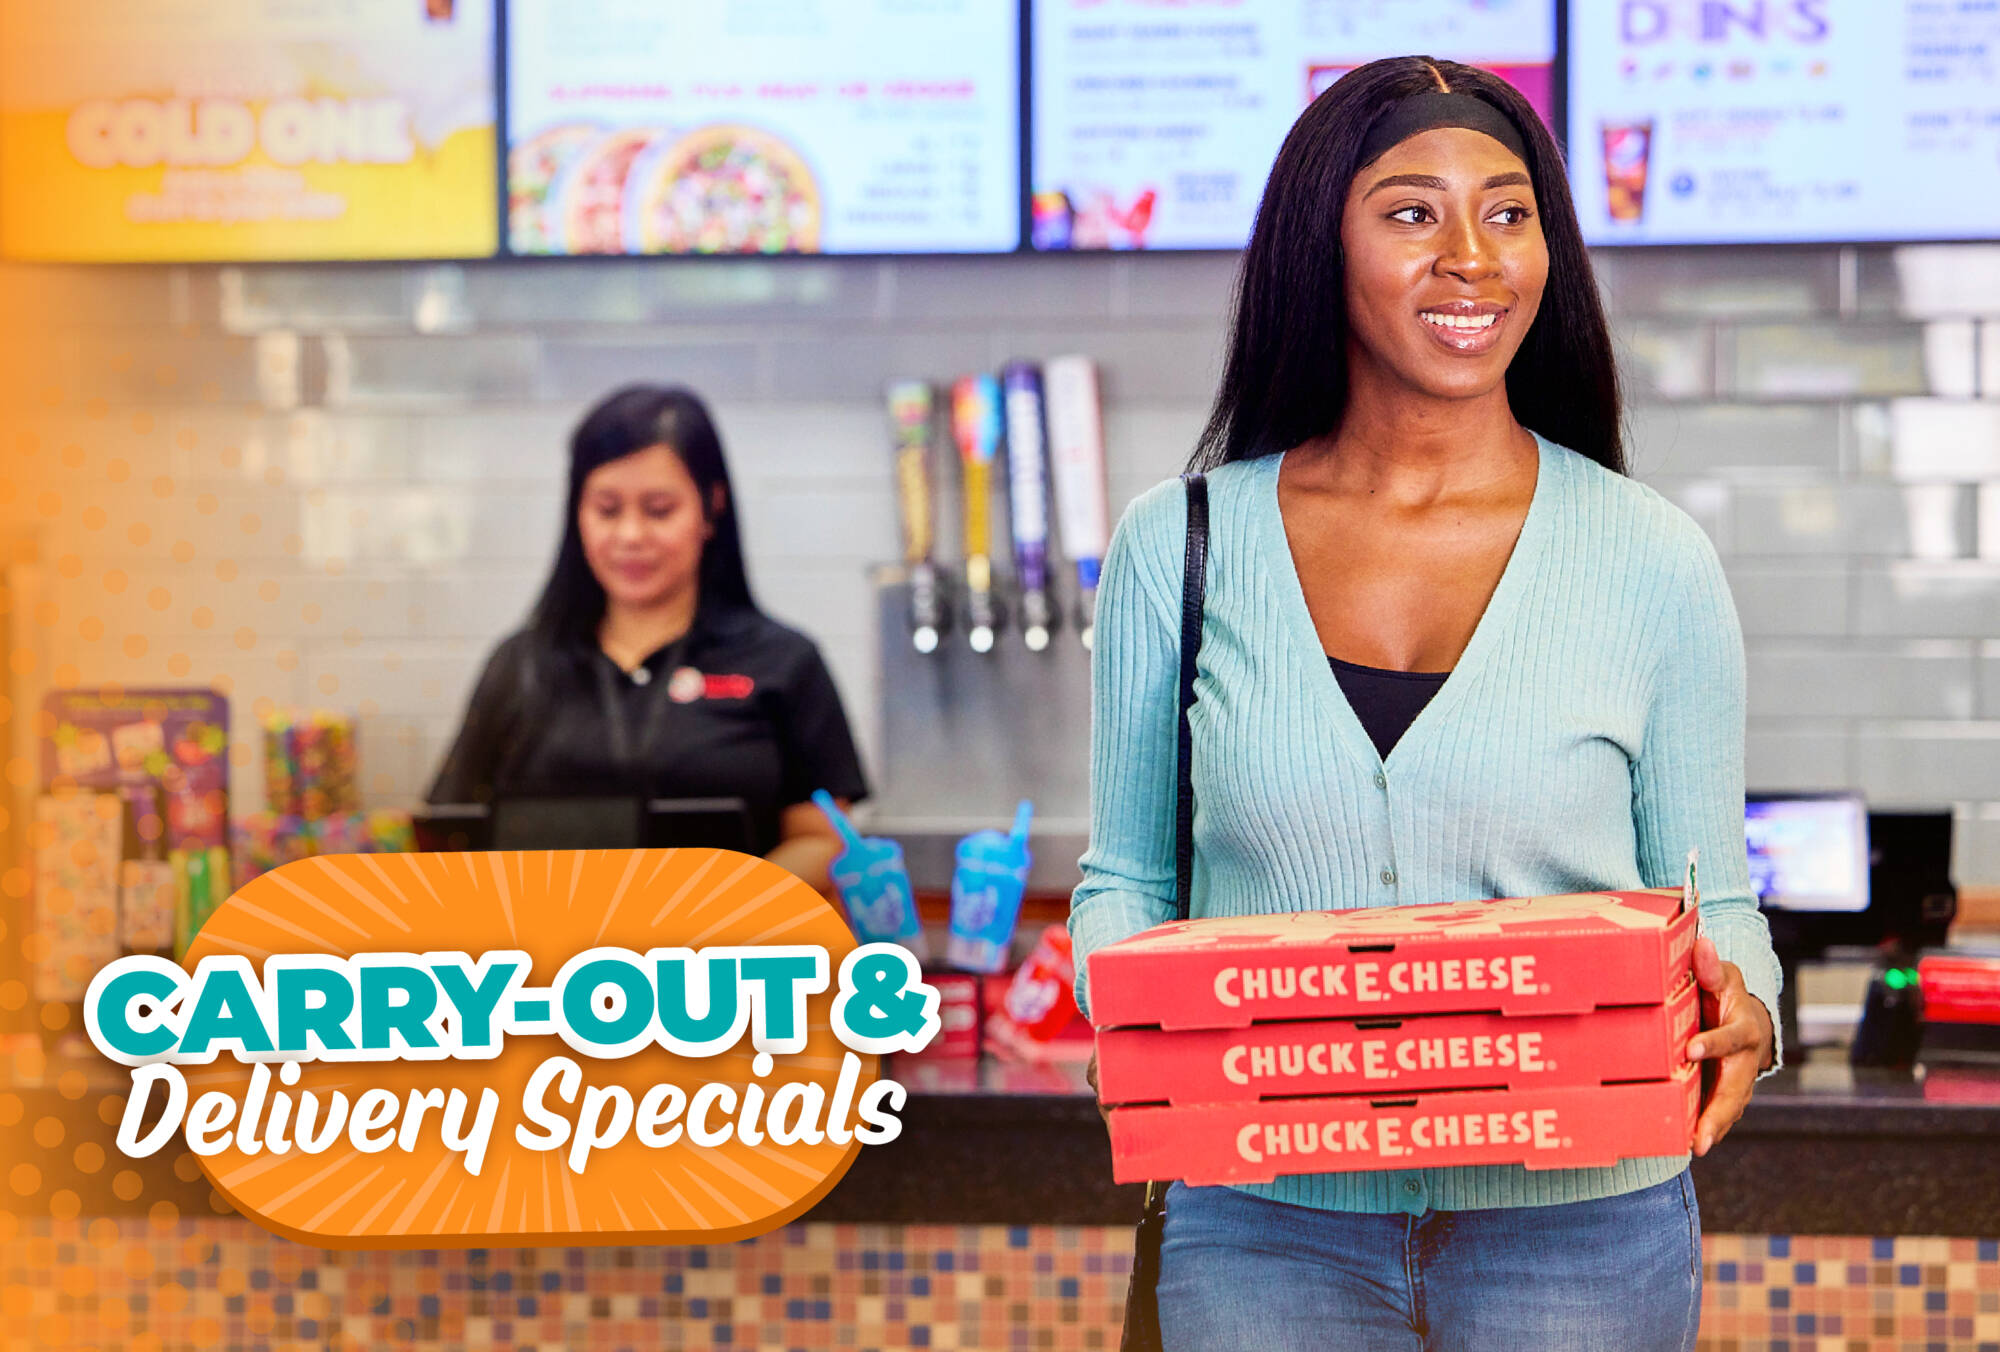 "Carry-Out & Delivery Specials" Lady carrying out three pizzas